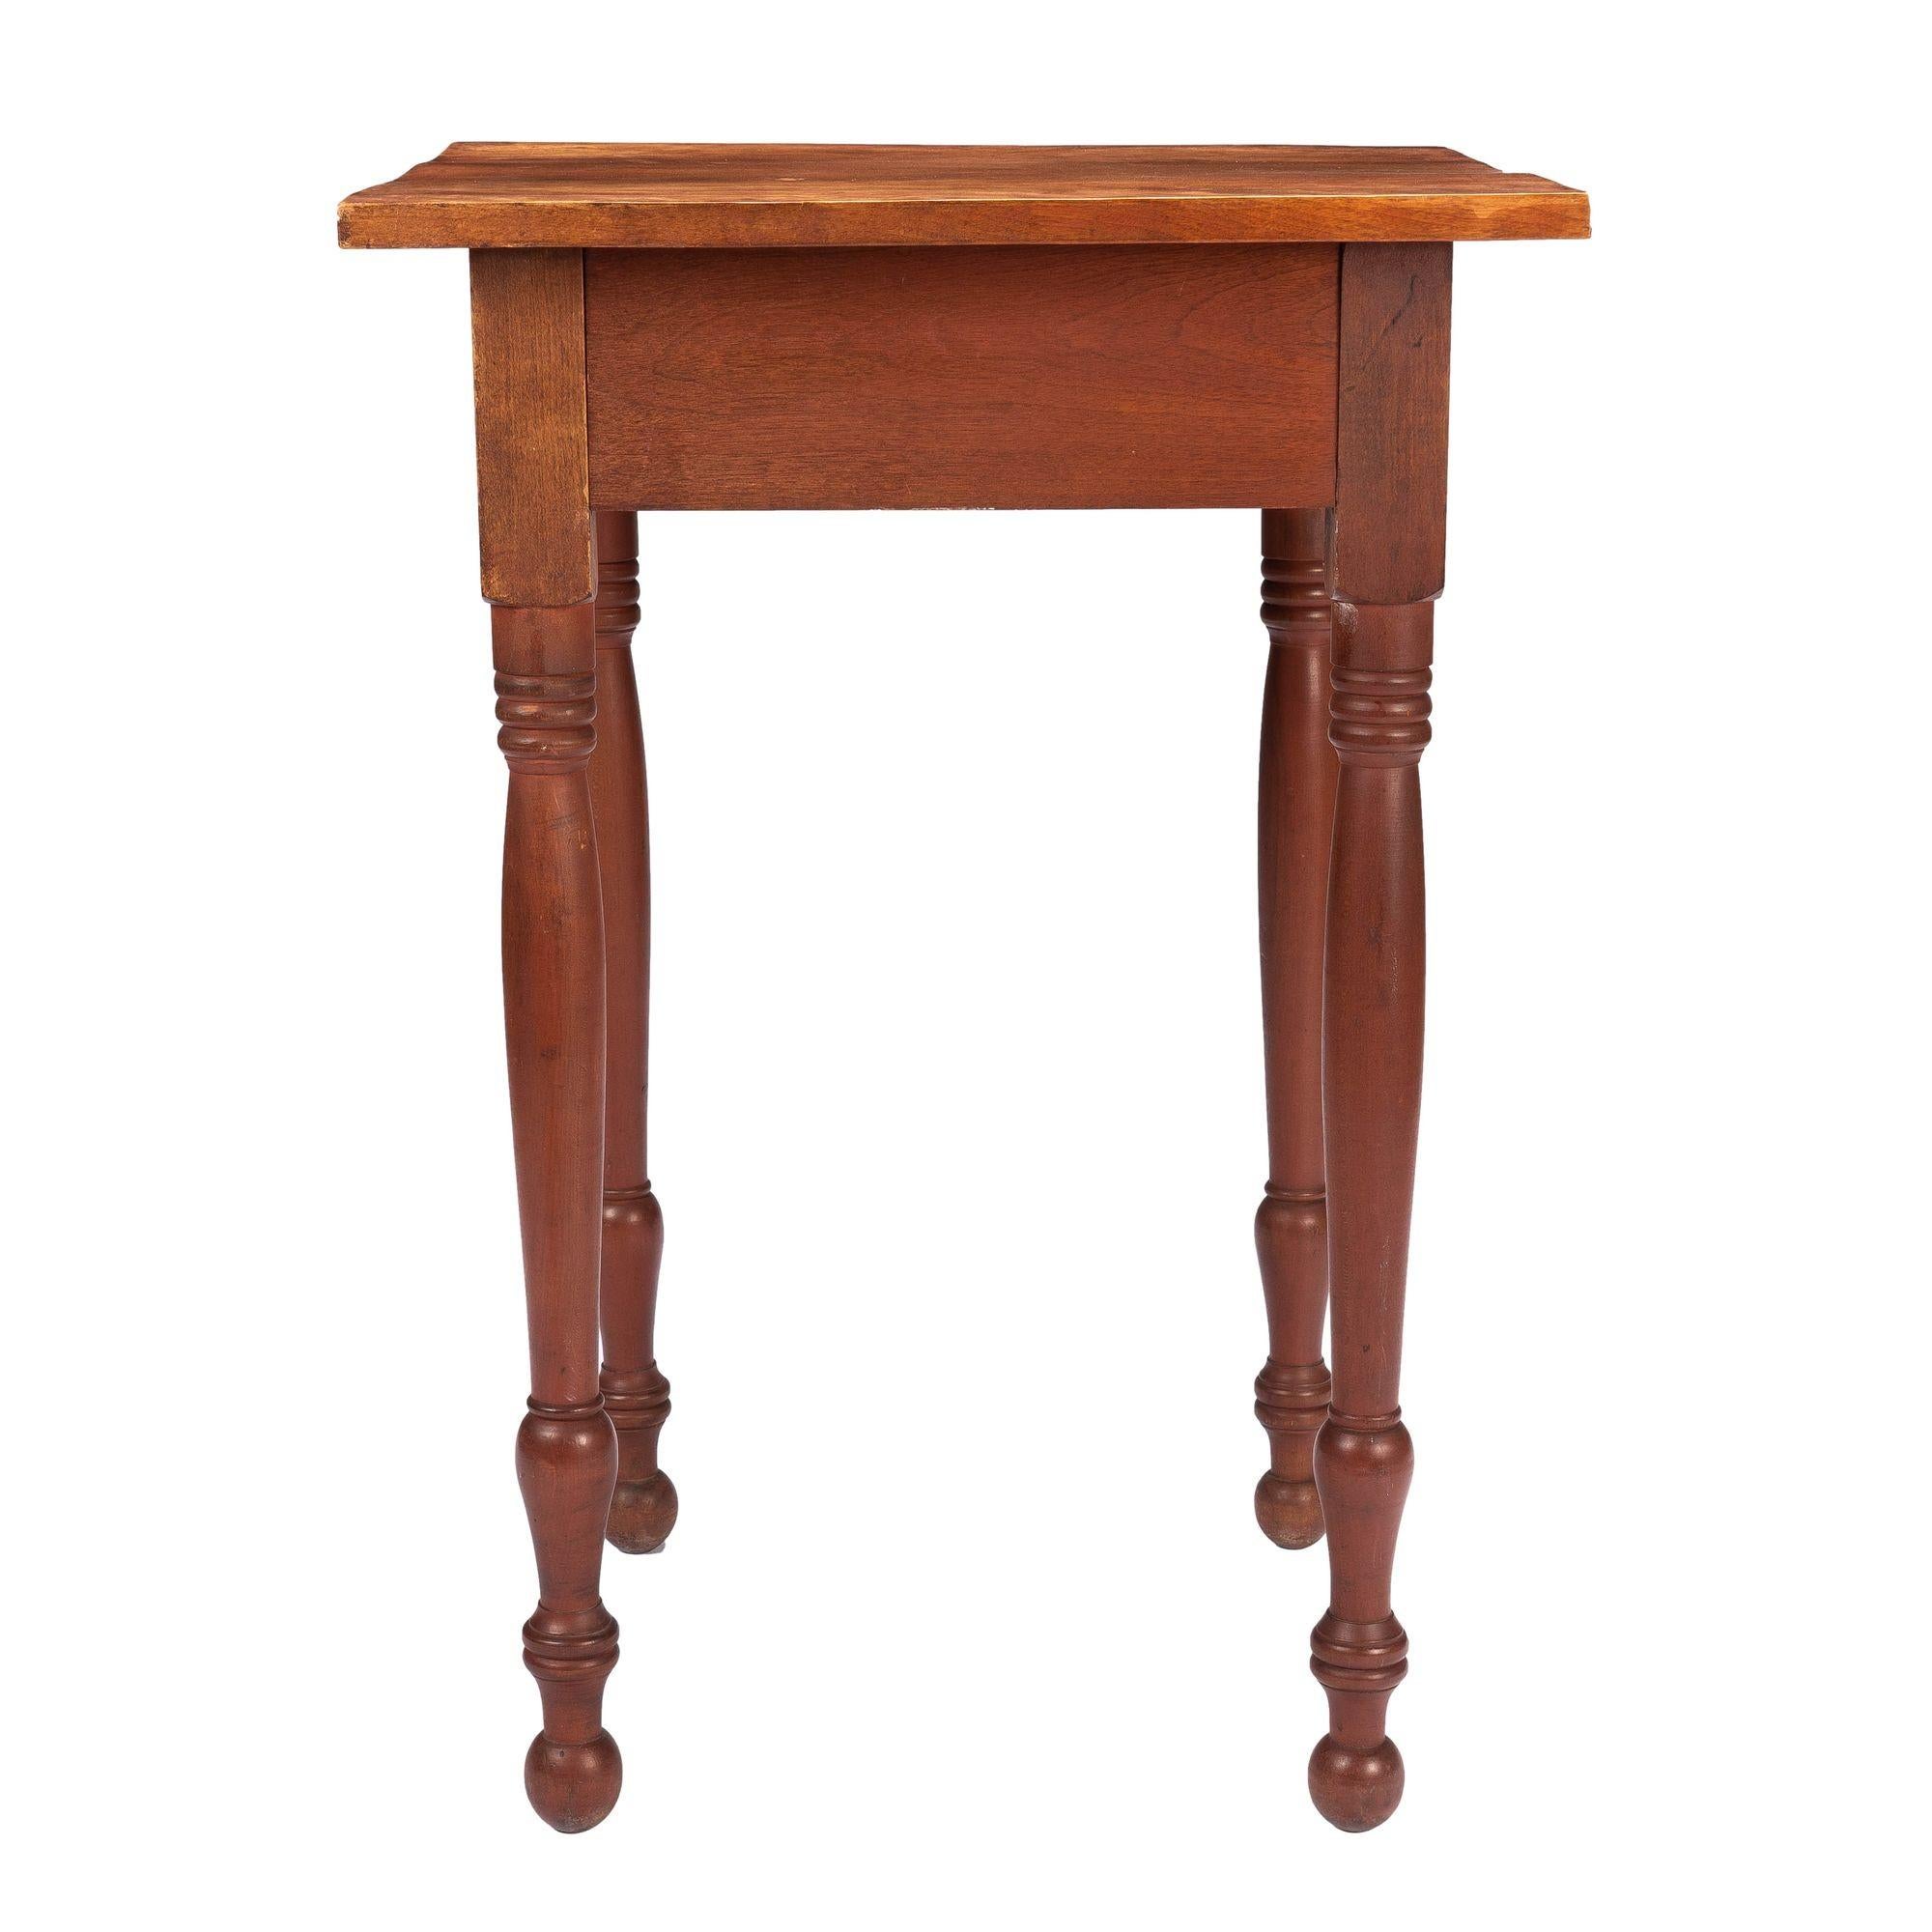 New England Country Sheraton Stained Birch One Drawer Stand '1830' For Sale 1